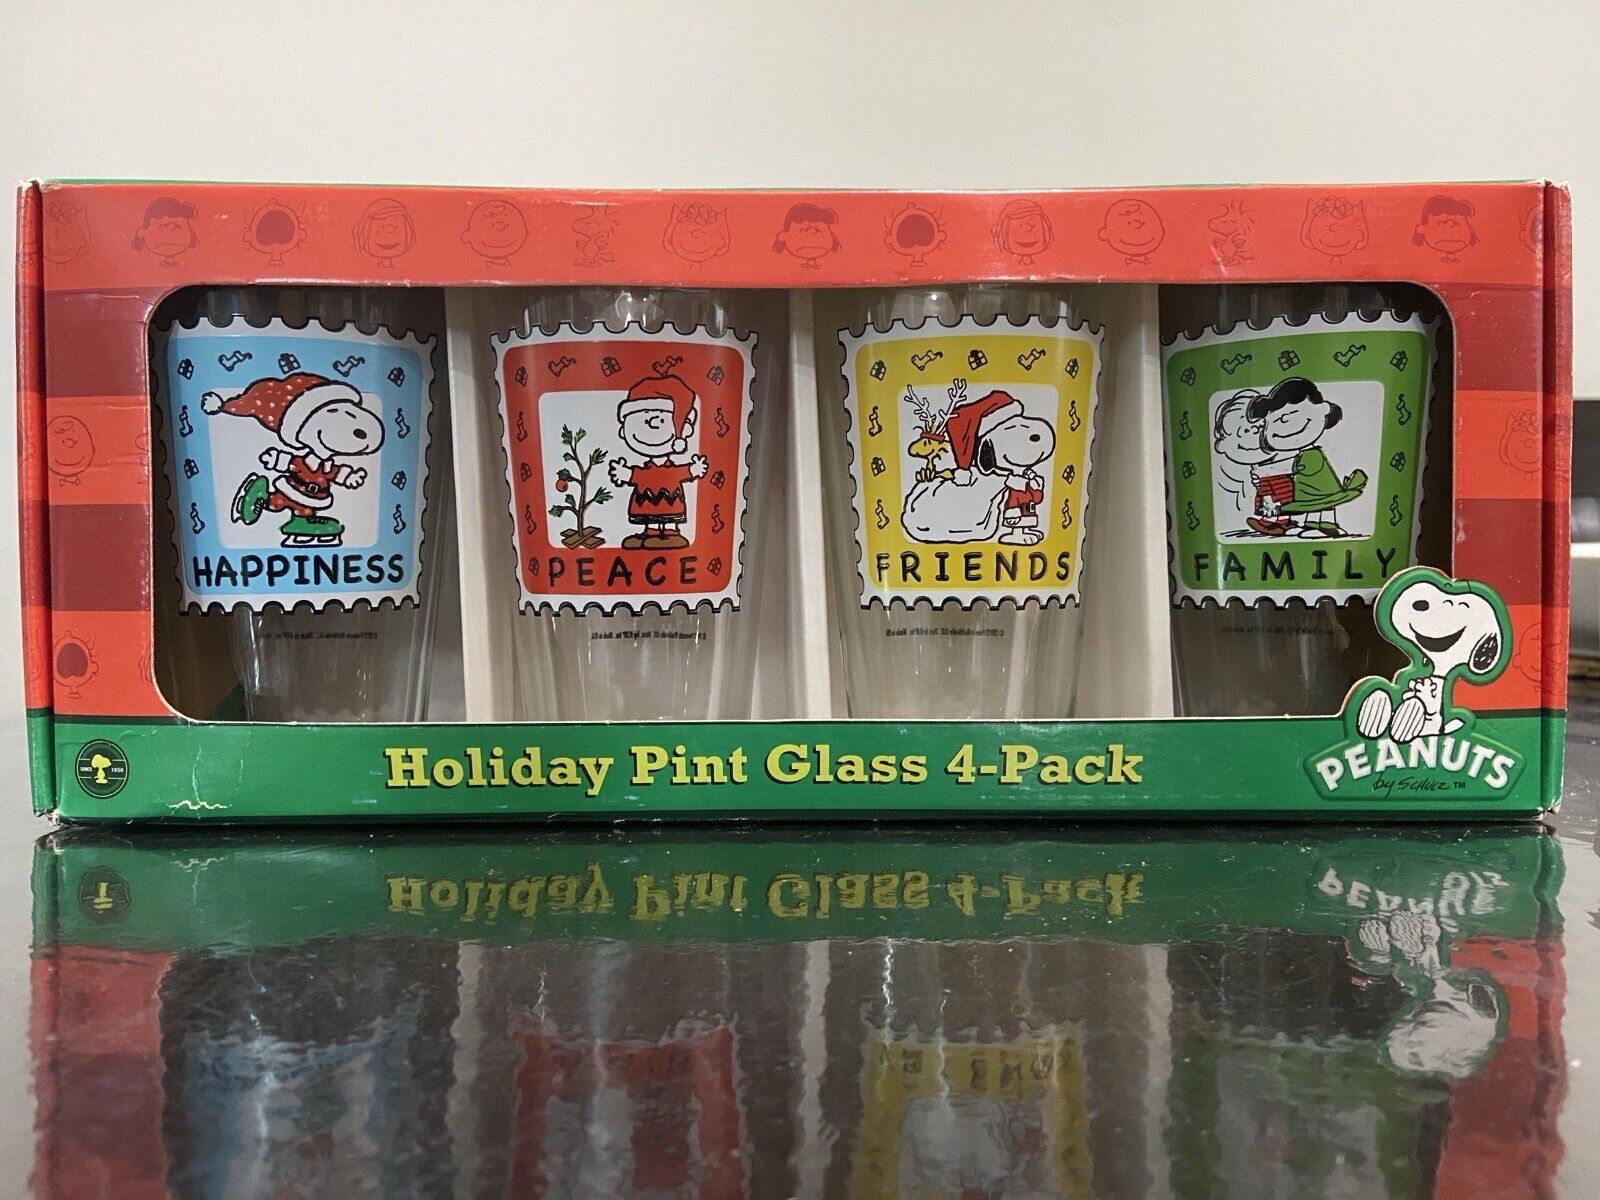 Peanuts by Schultz Holiday Pint Glass 4 pack